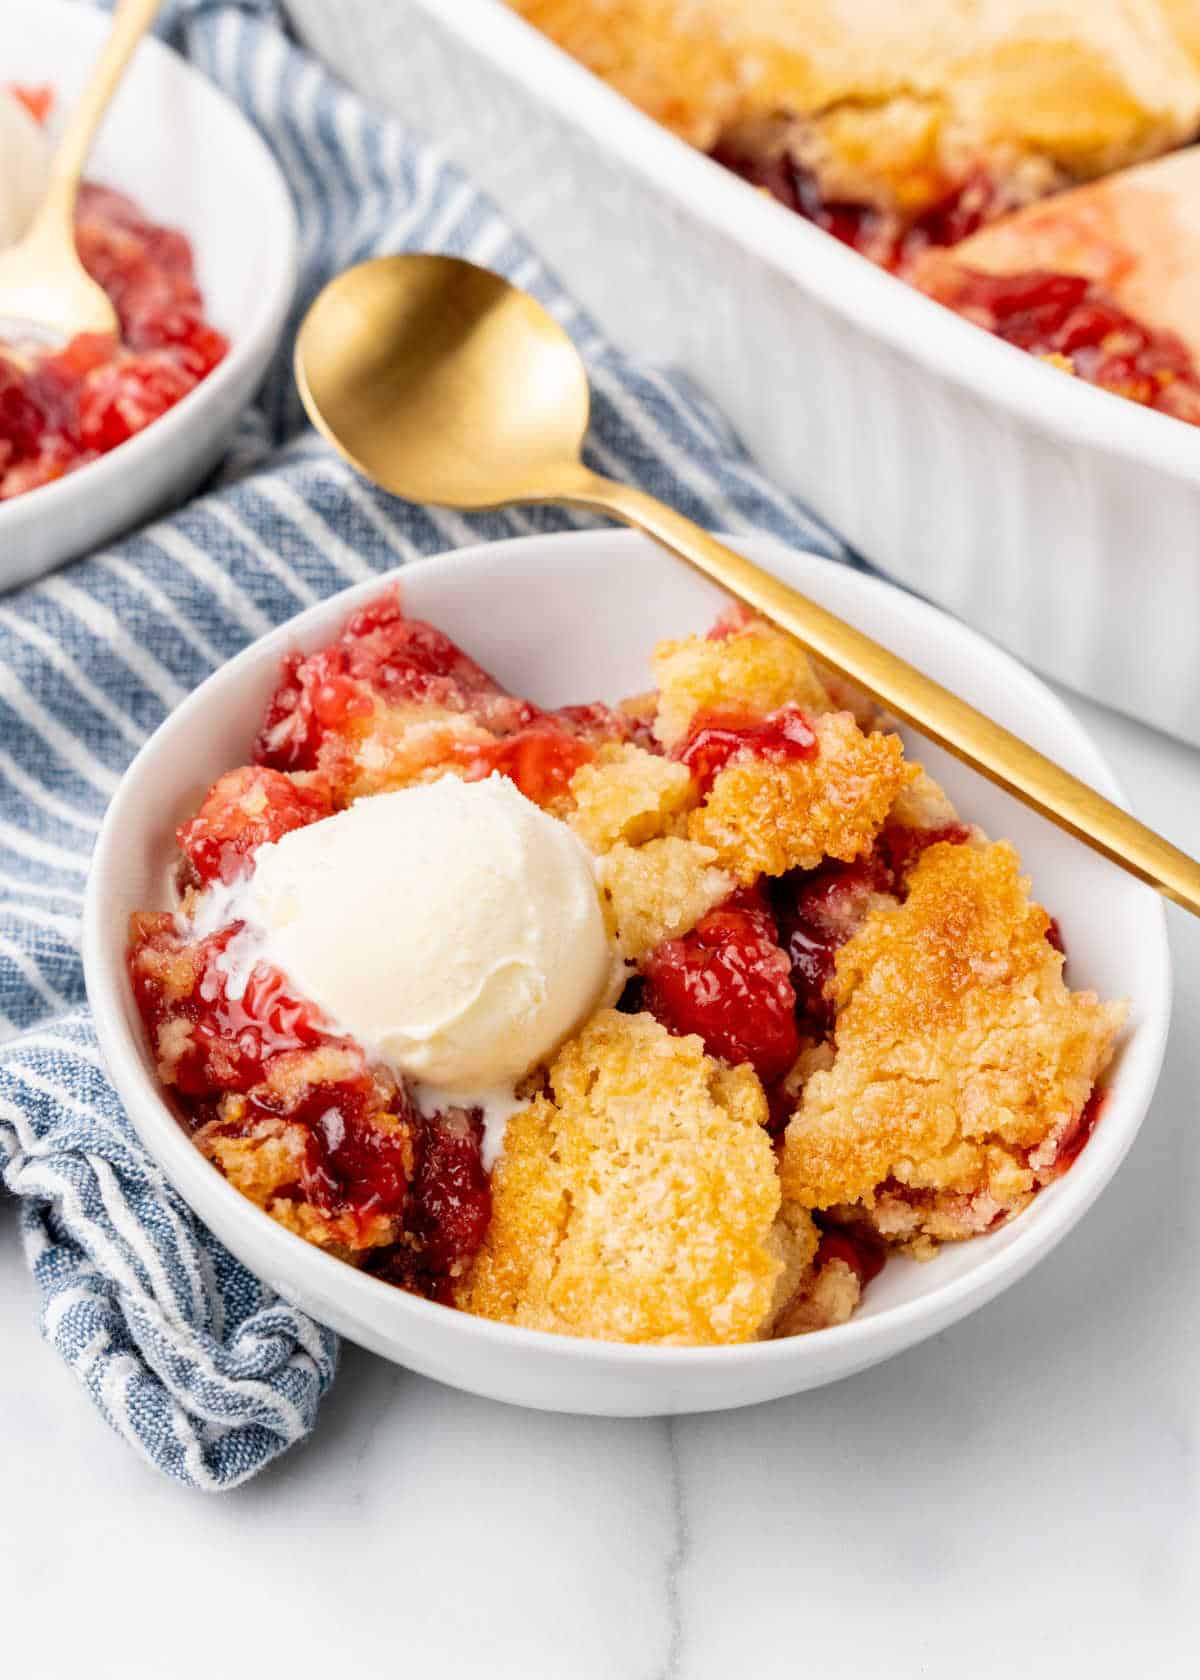 Serving of cherry dump cake with ice cream in a white bowl. A gold spoon, white marble surface, striped blue white cloth.